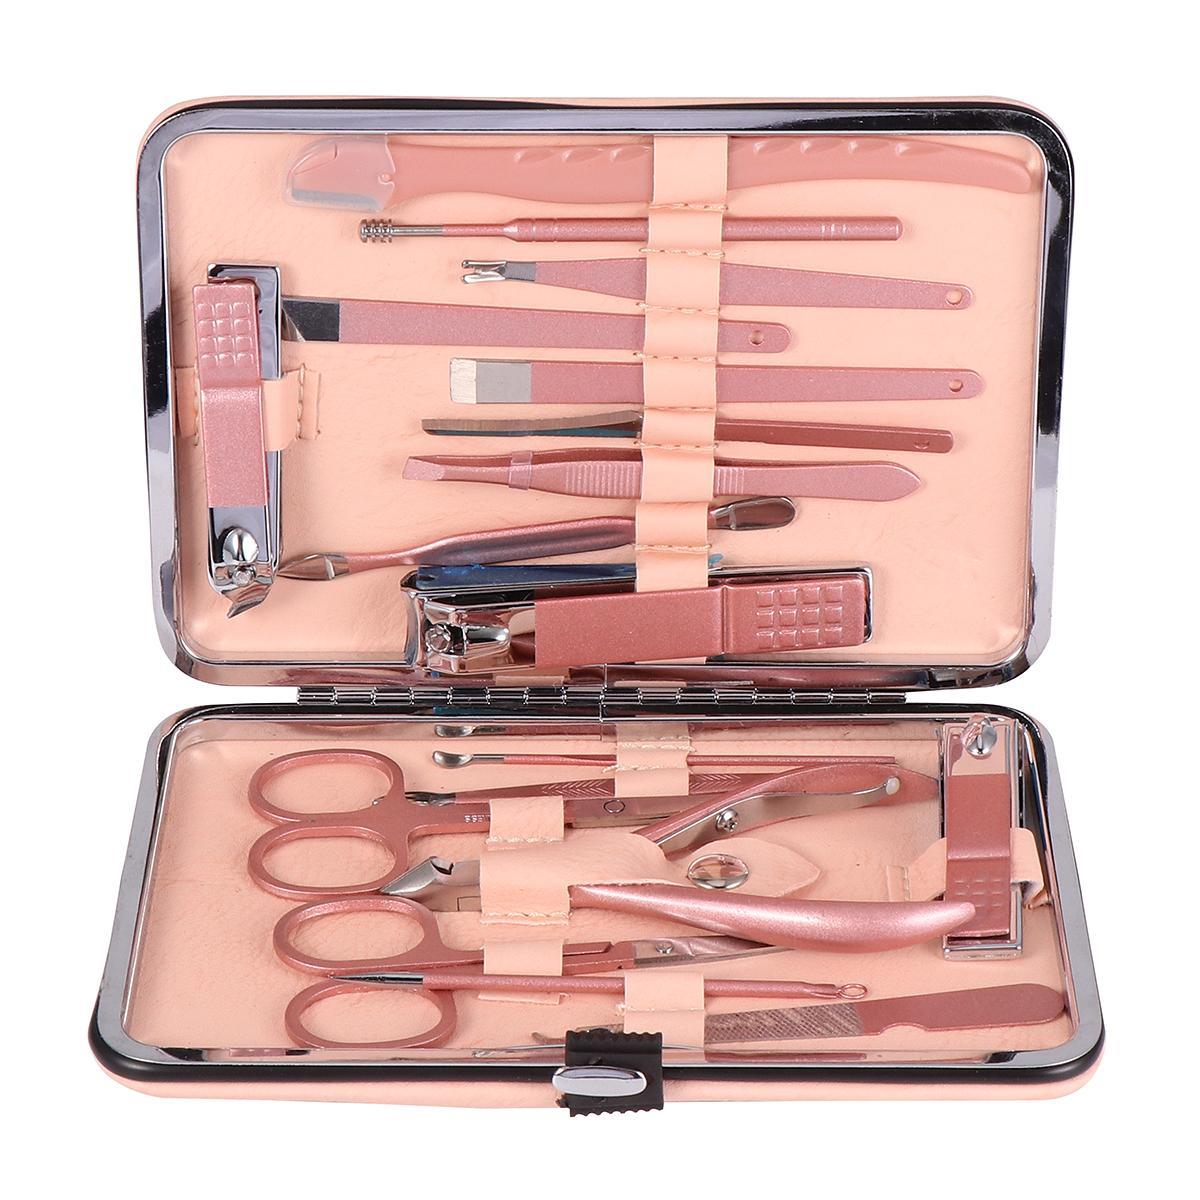 18 Pcs Nail Care Stainless Steel Rose Gold 18-Piece Clippers Scissors Set Beauty Manicure Tools Kit File Buffer